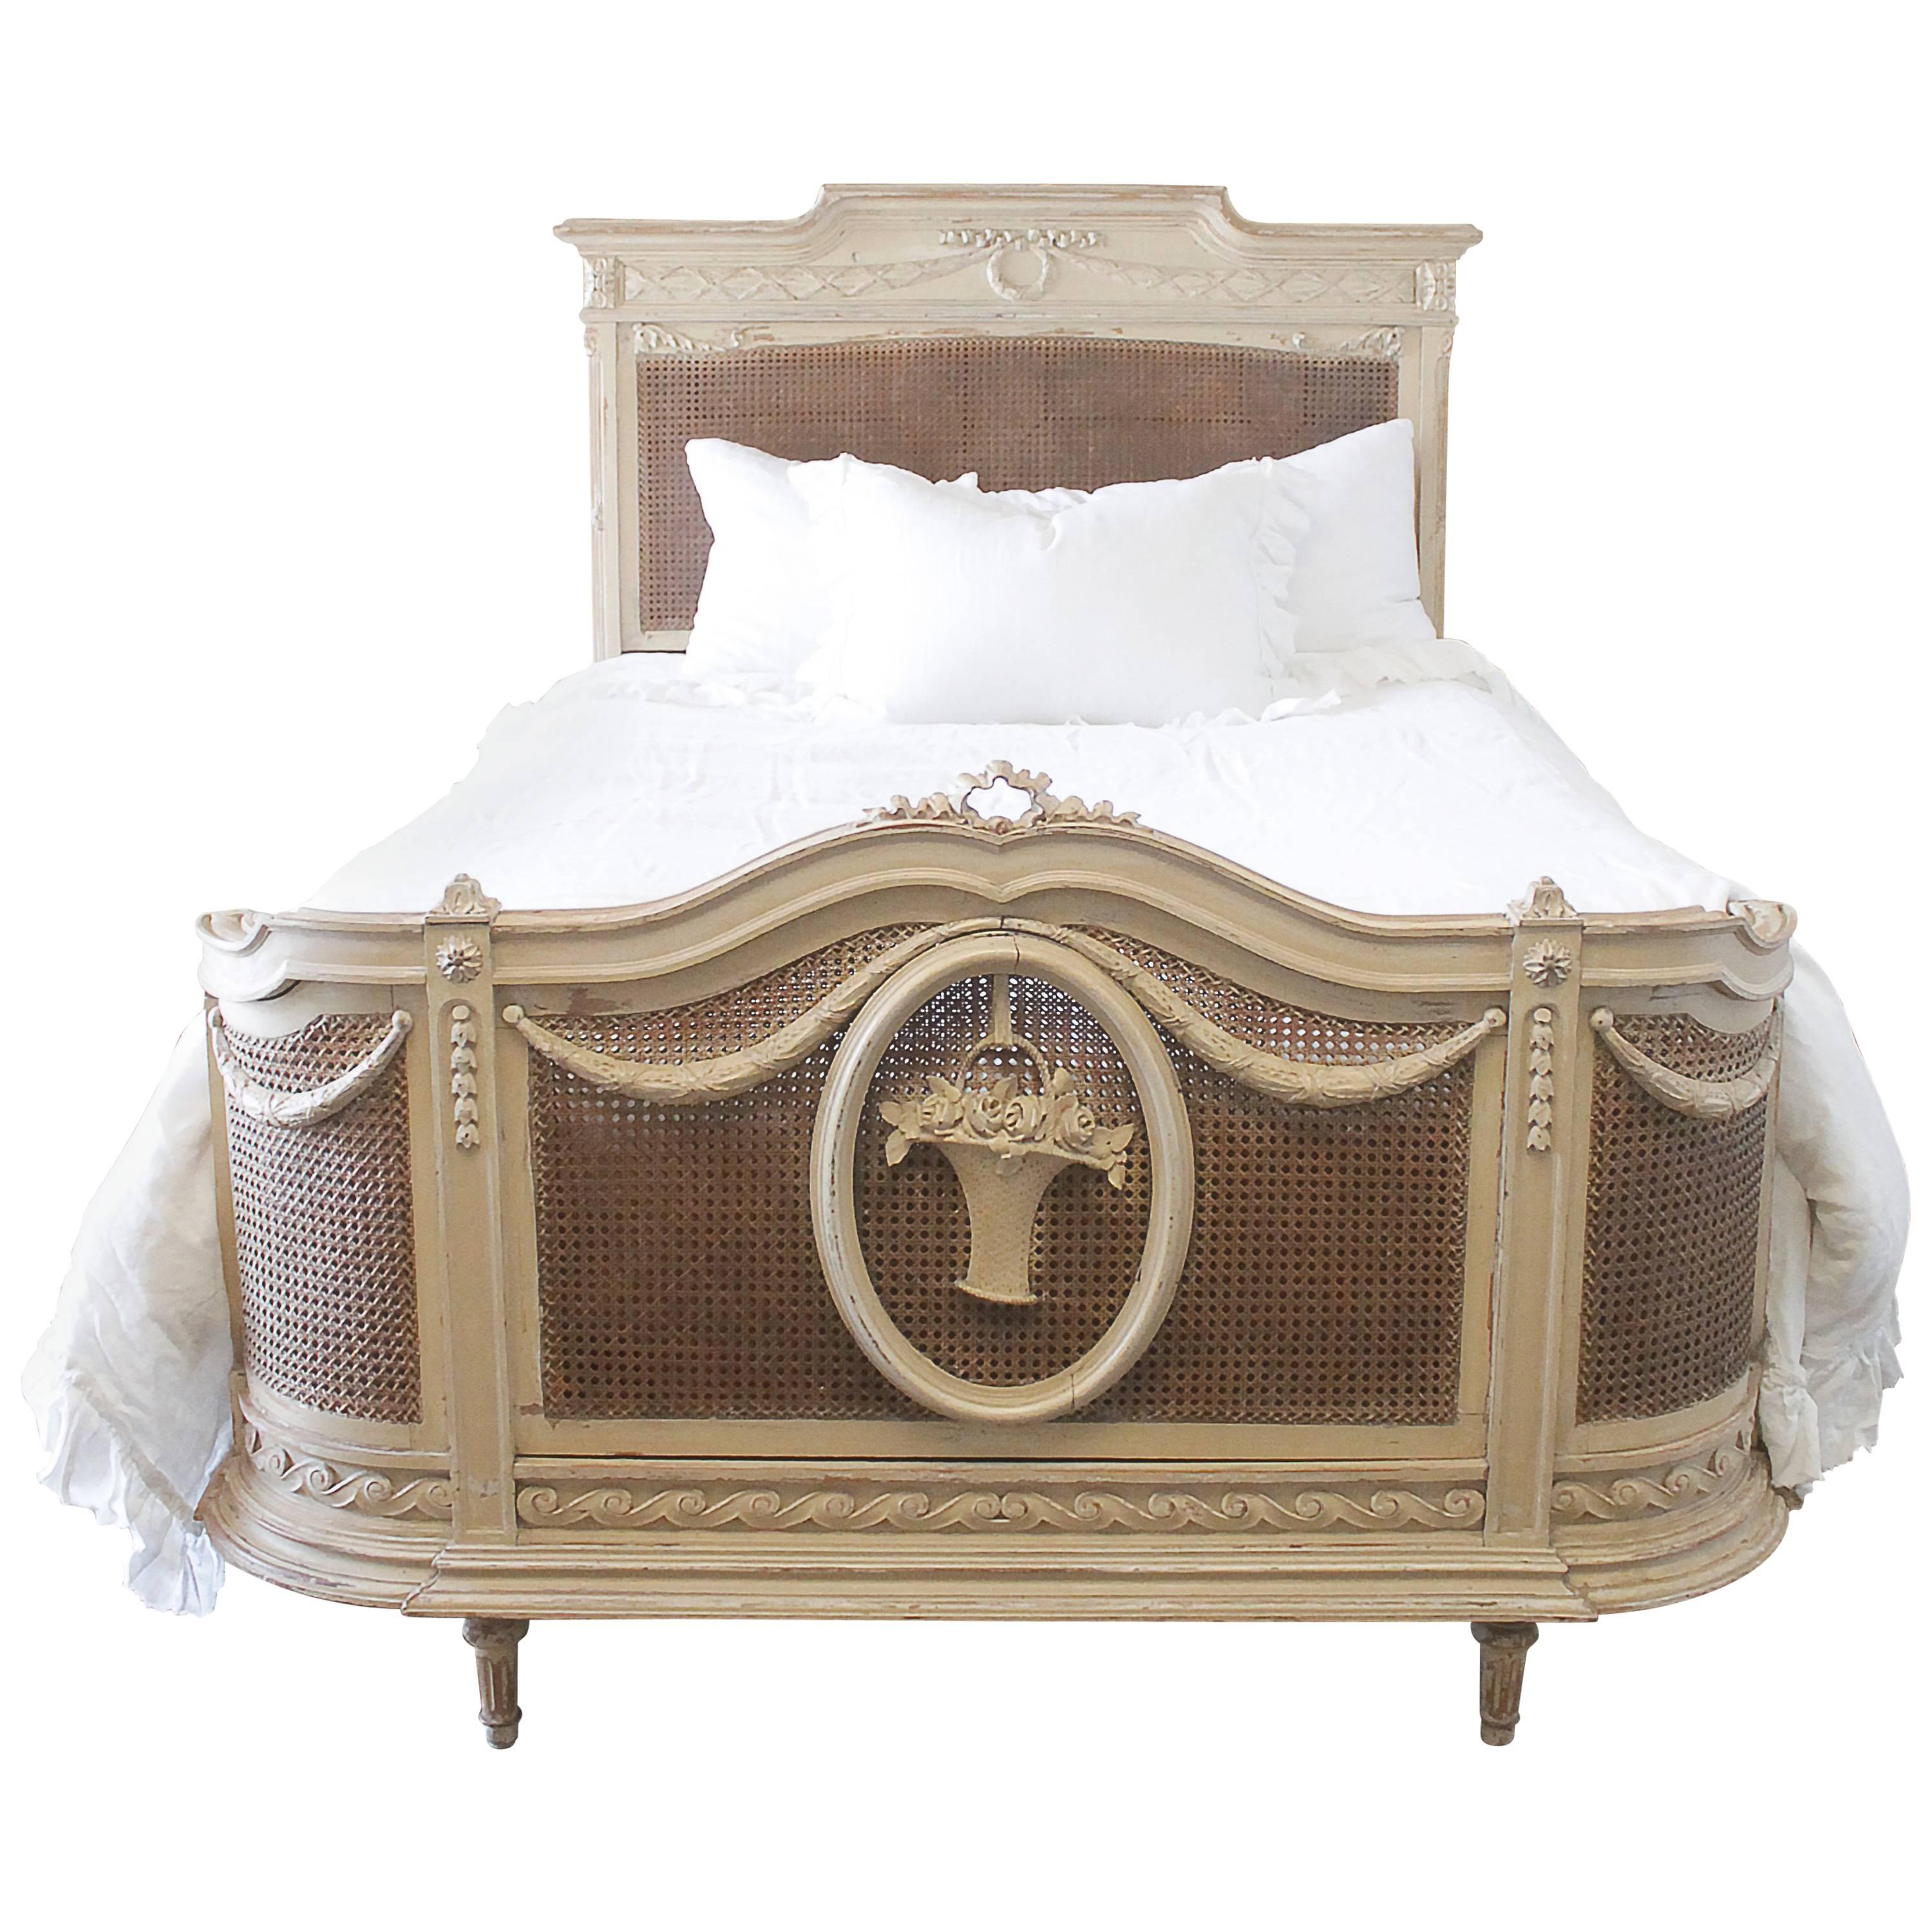 19th Century Full Size French Country Style Painted Double Caned Bed